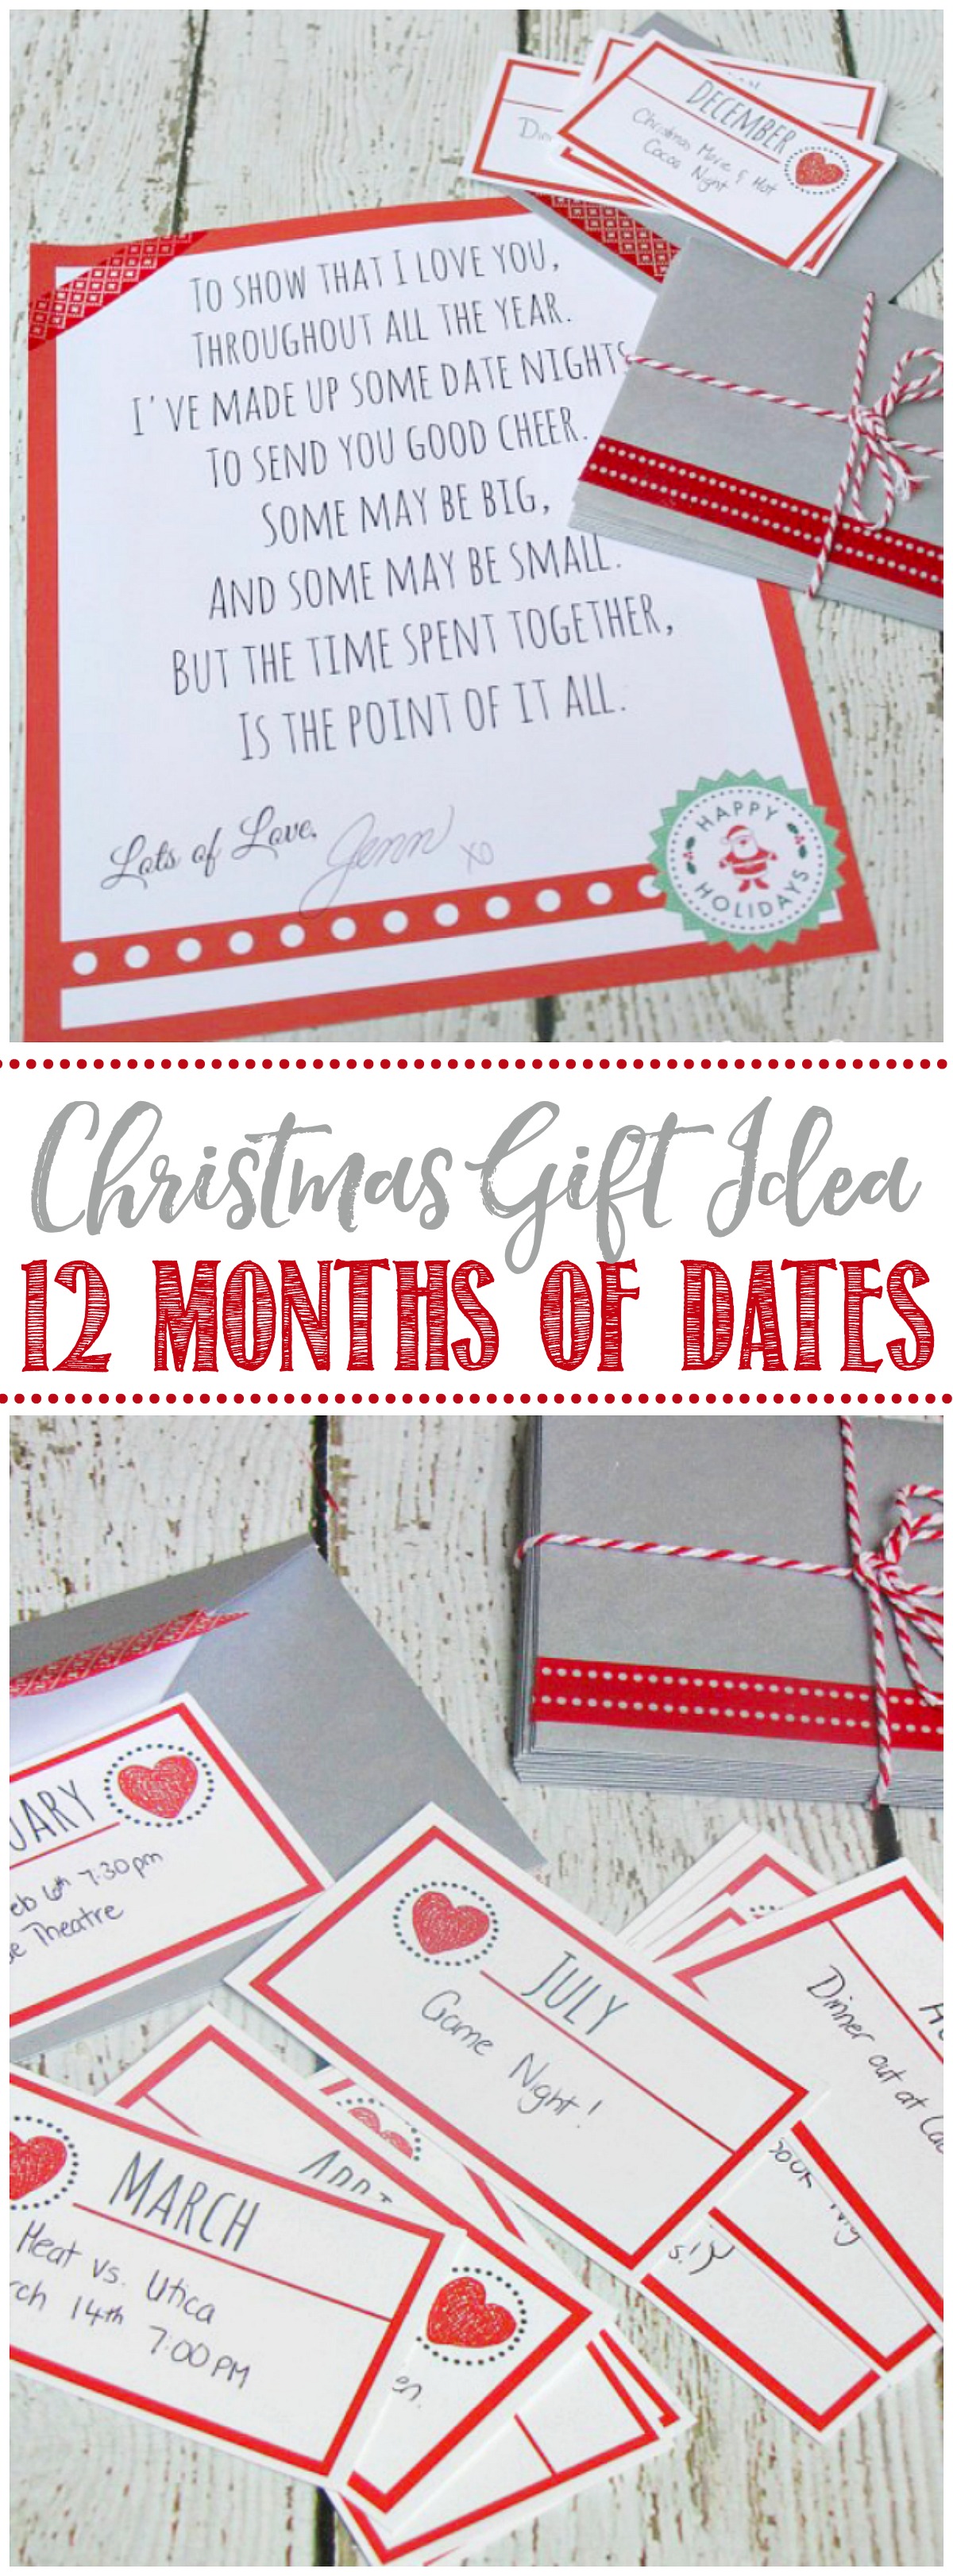 12 months of dates Christmas gift idea with free printables.